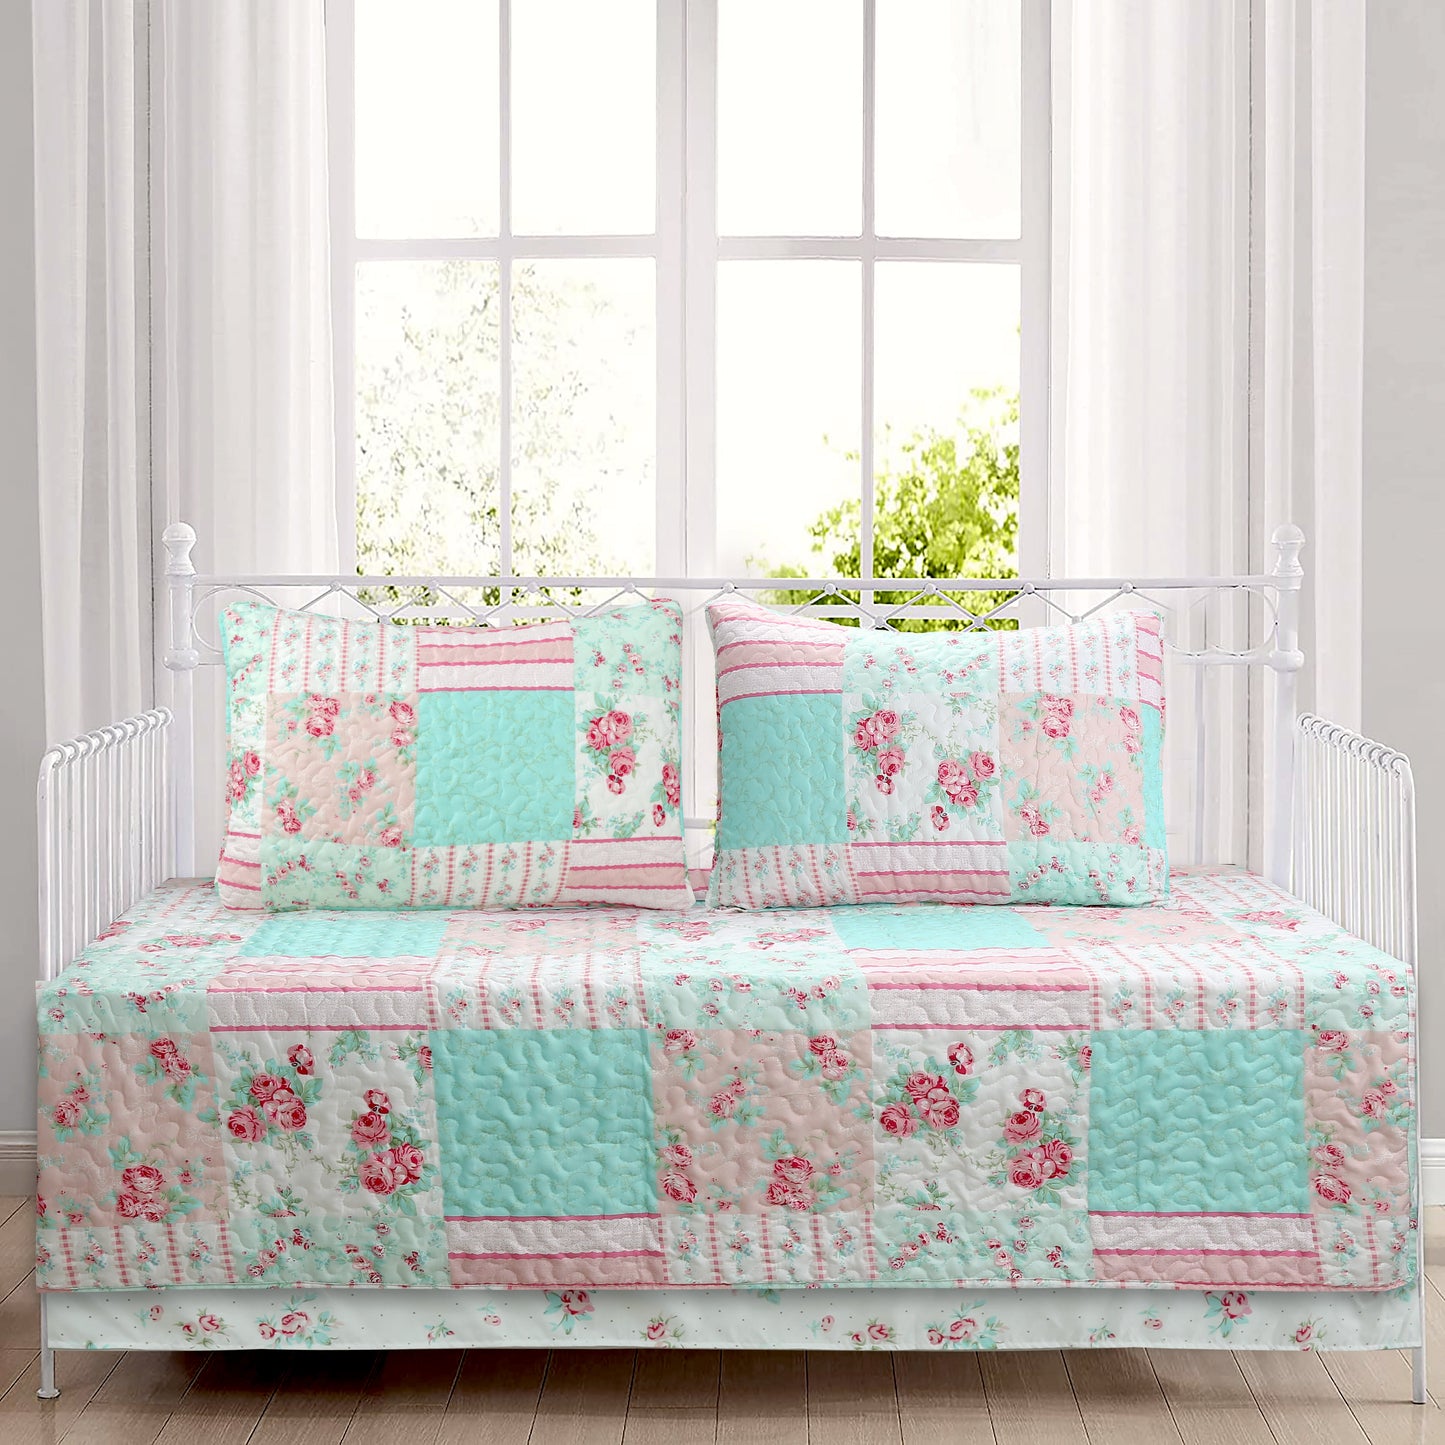 Tiffany Pink Blossom Floral Garden Girl Print Patchwork Reversible DayBed Quilted Bedding Set